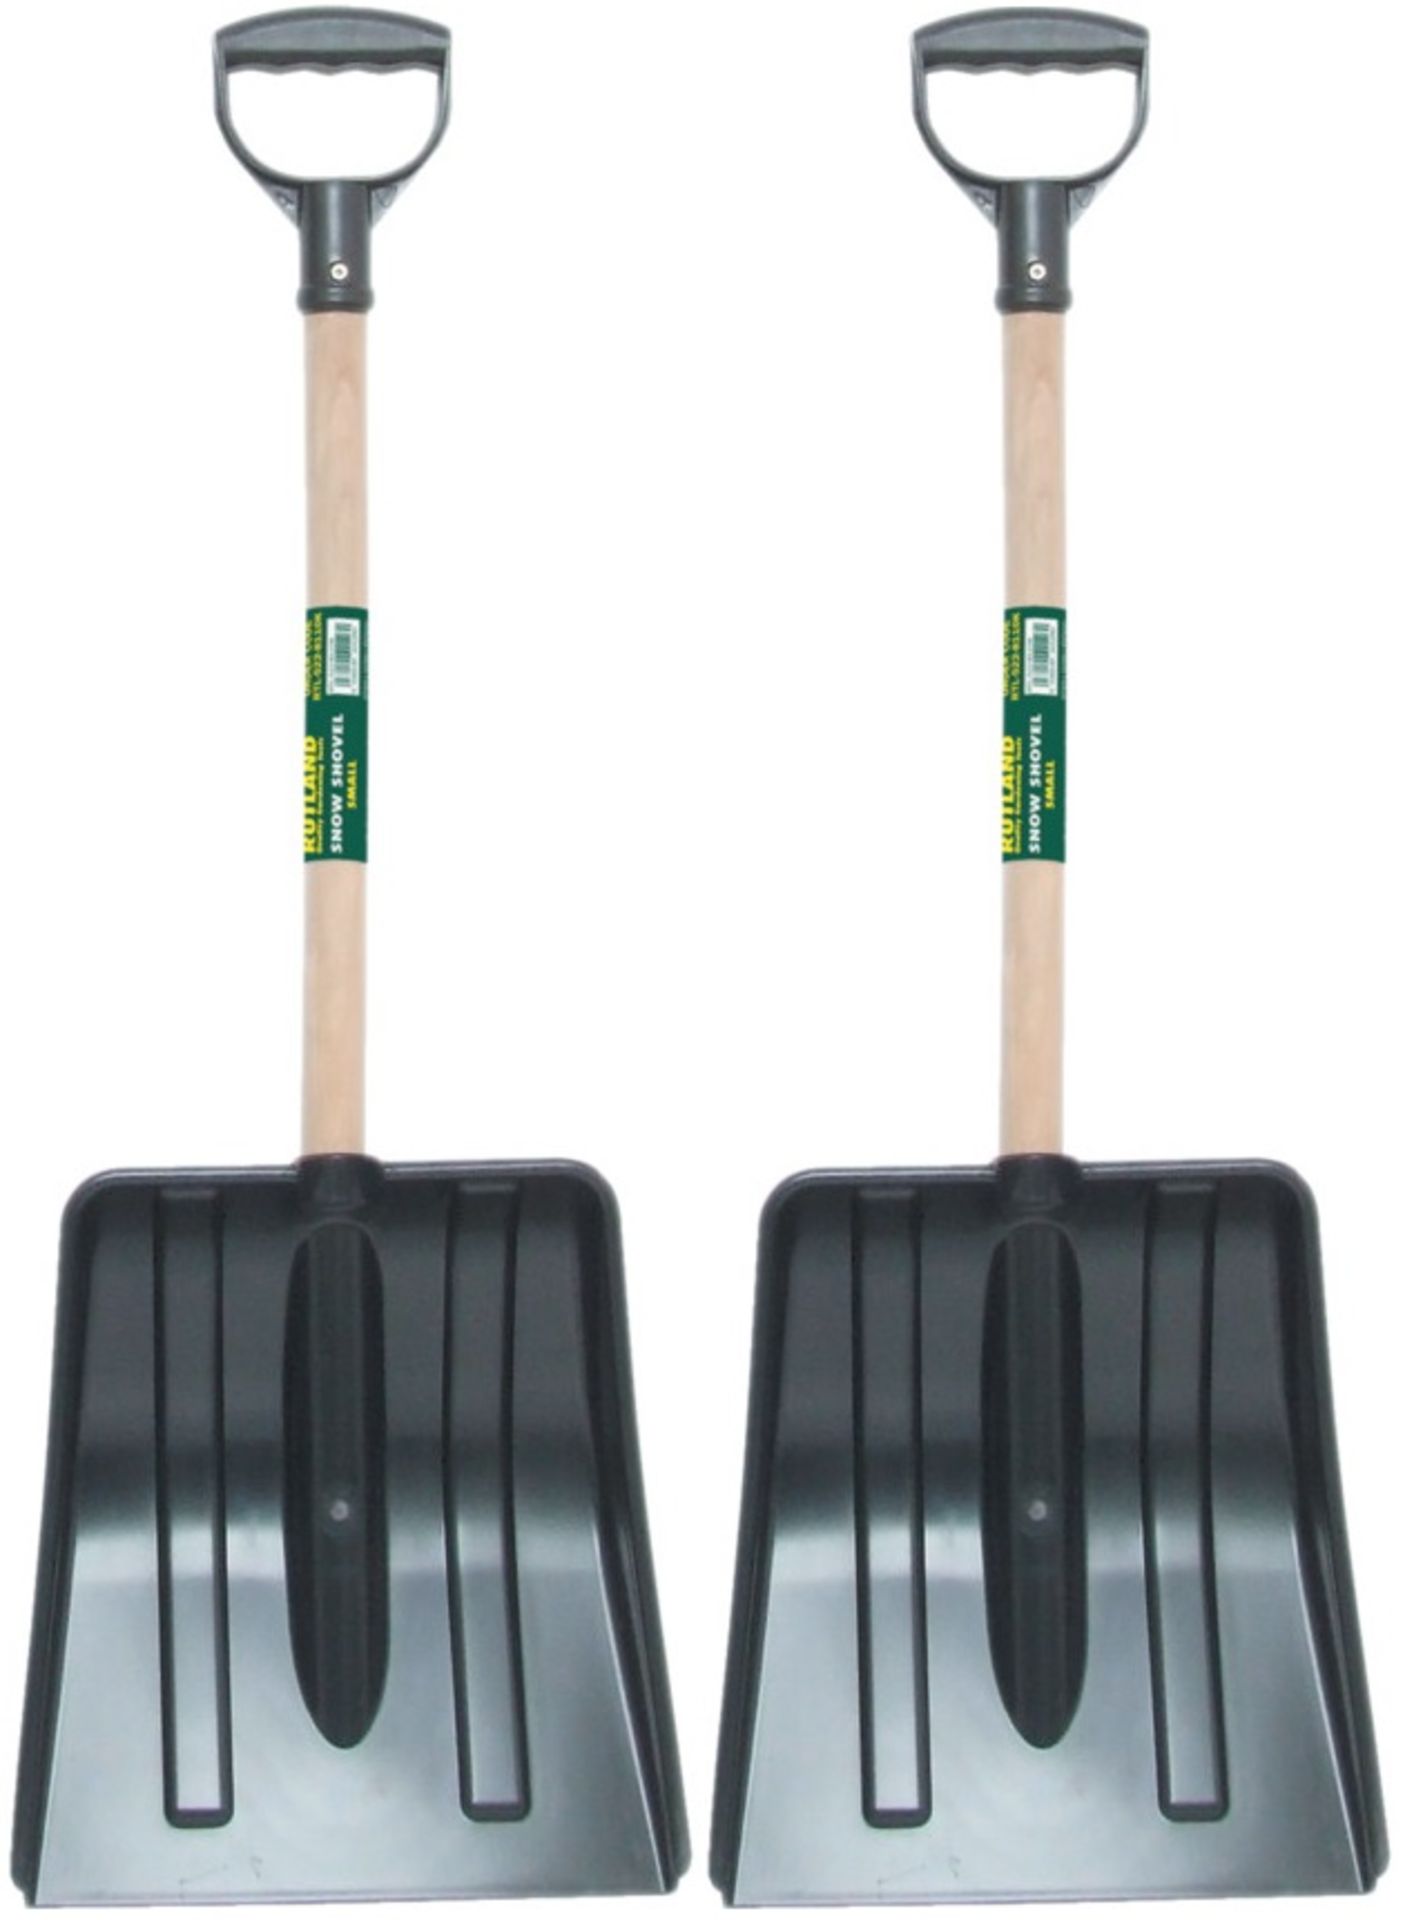 V Brand New A Lot Of 2 Rutland Small Wooden Handled Snow Shovel Ideal For Carrying In Car - Handle